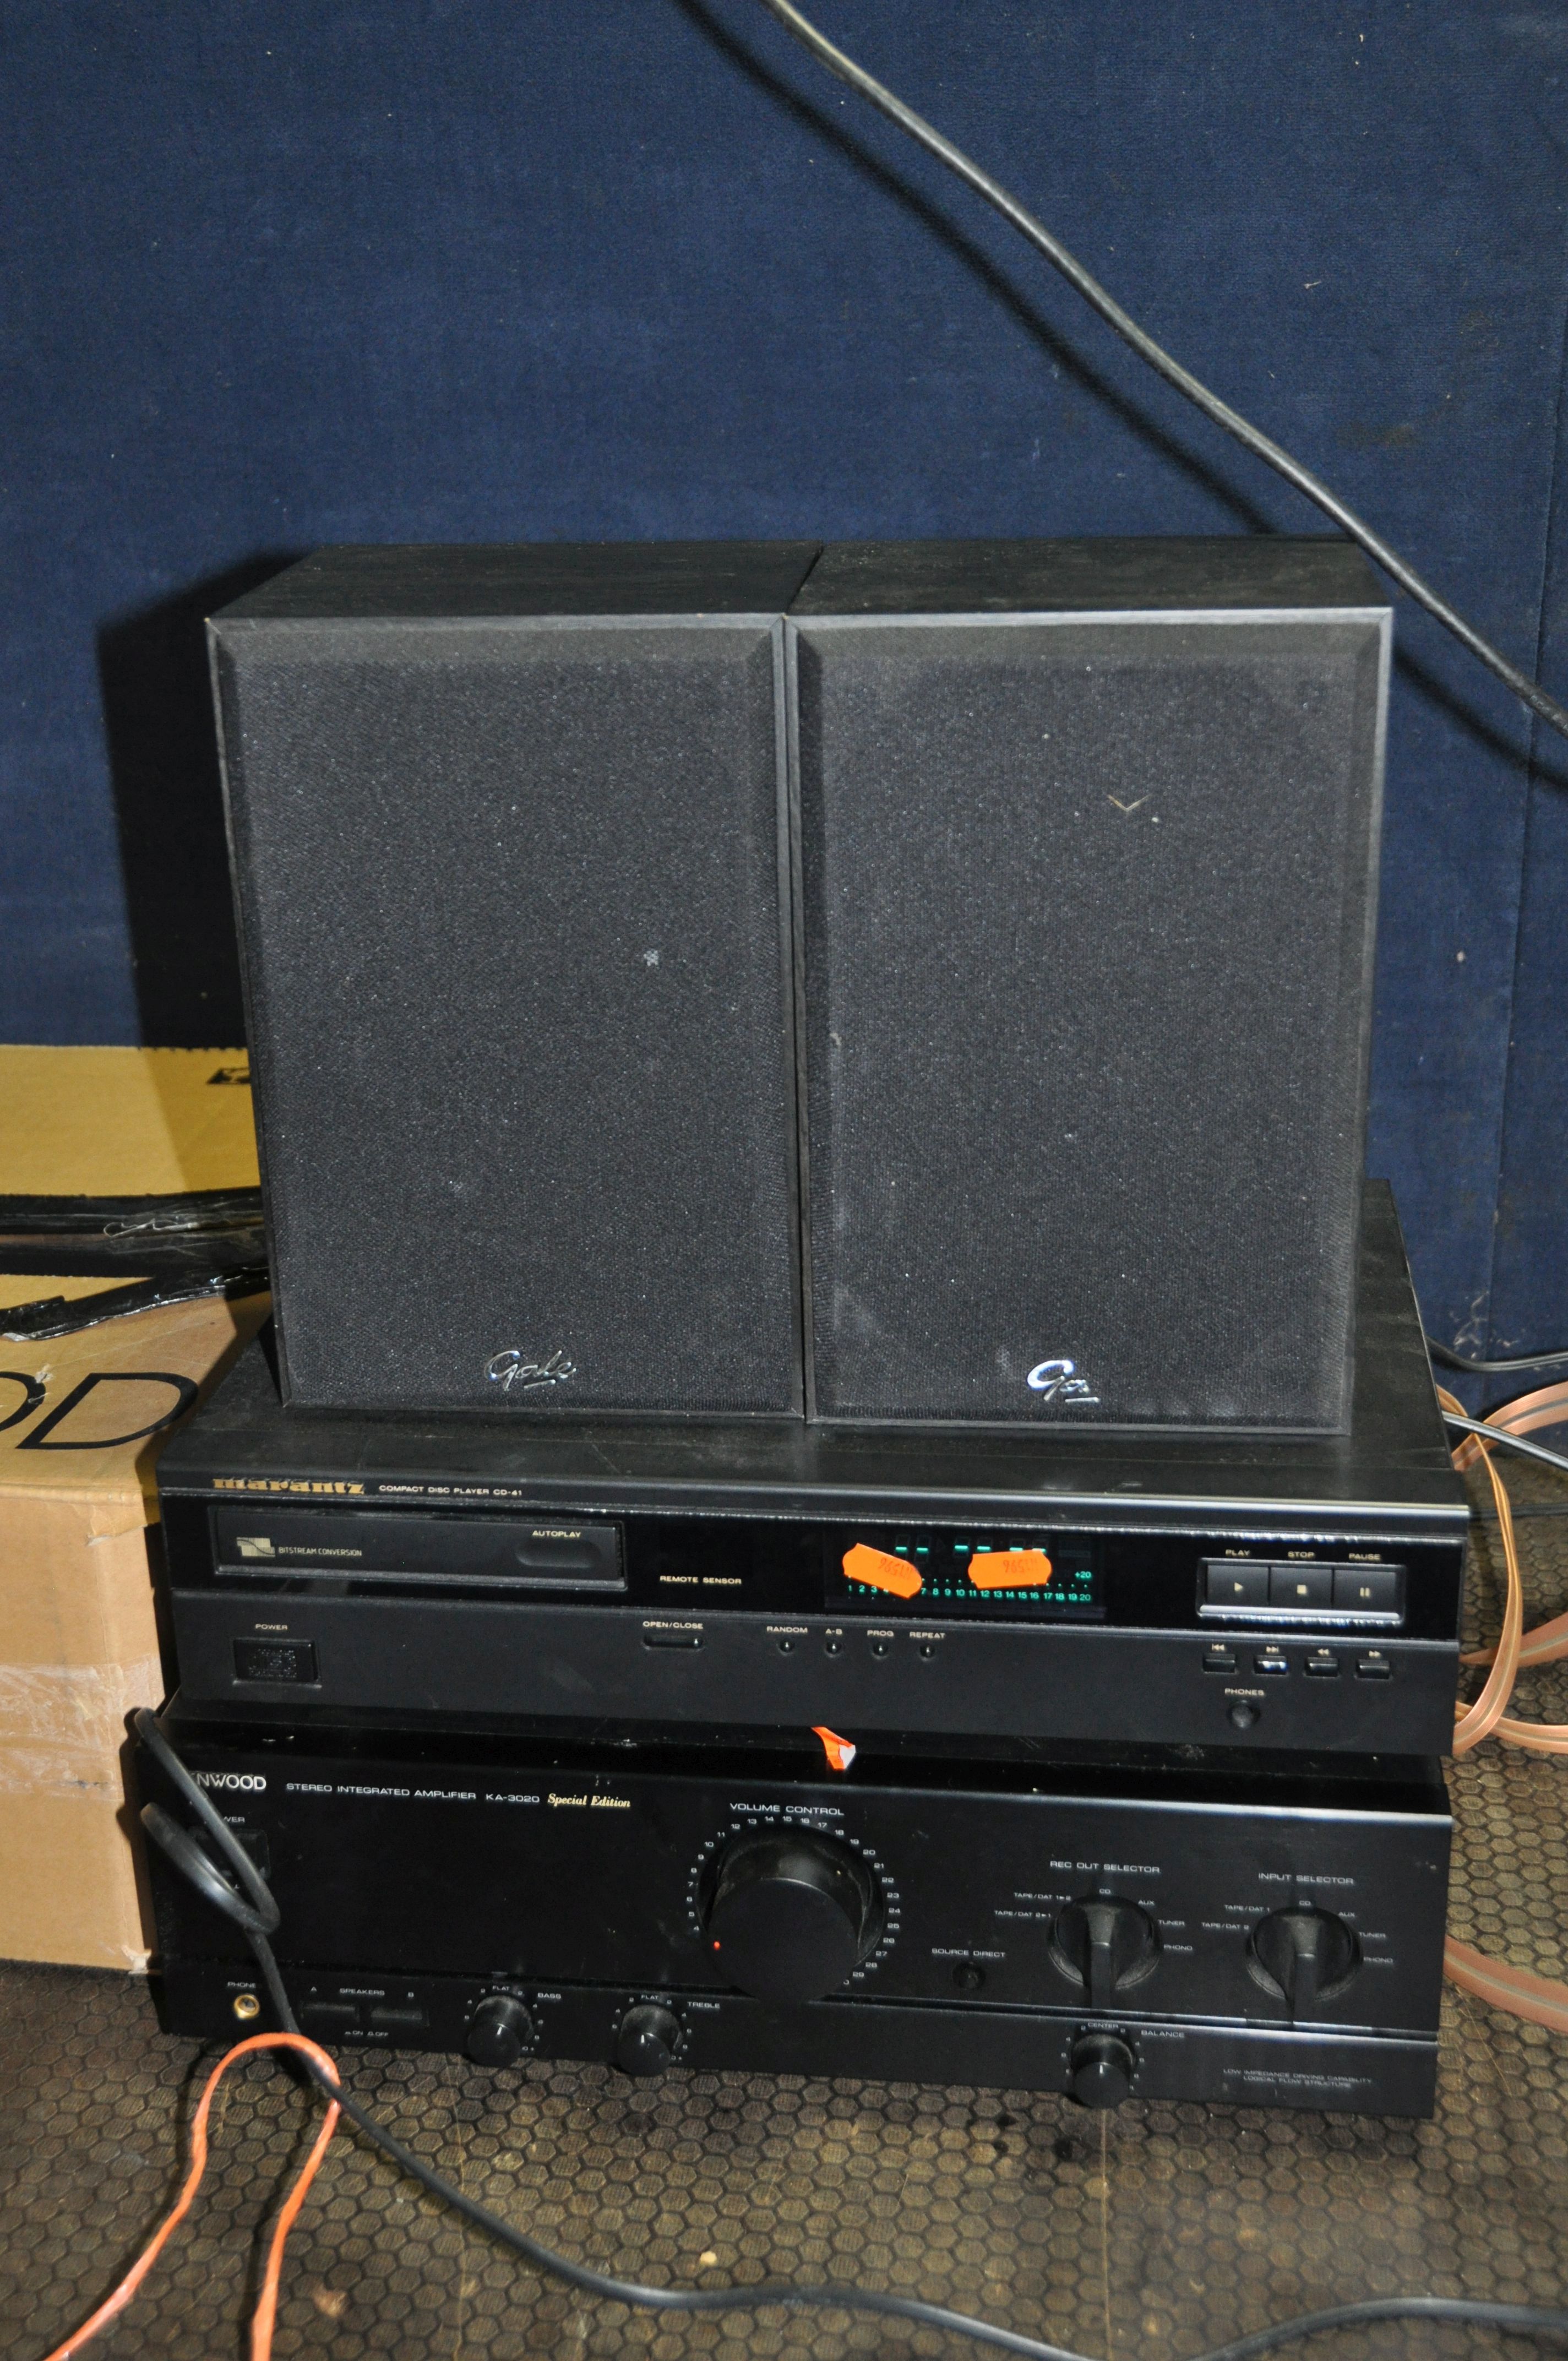 A KENWOOD, MARANTZ AND GALE COMPONENT HI FI comprising of a KA-3020SE amplifier with original box, a - Image 2 of 3